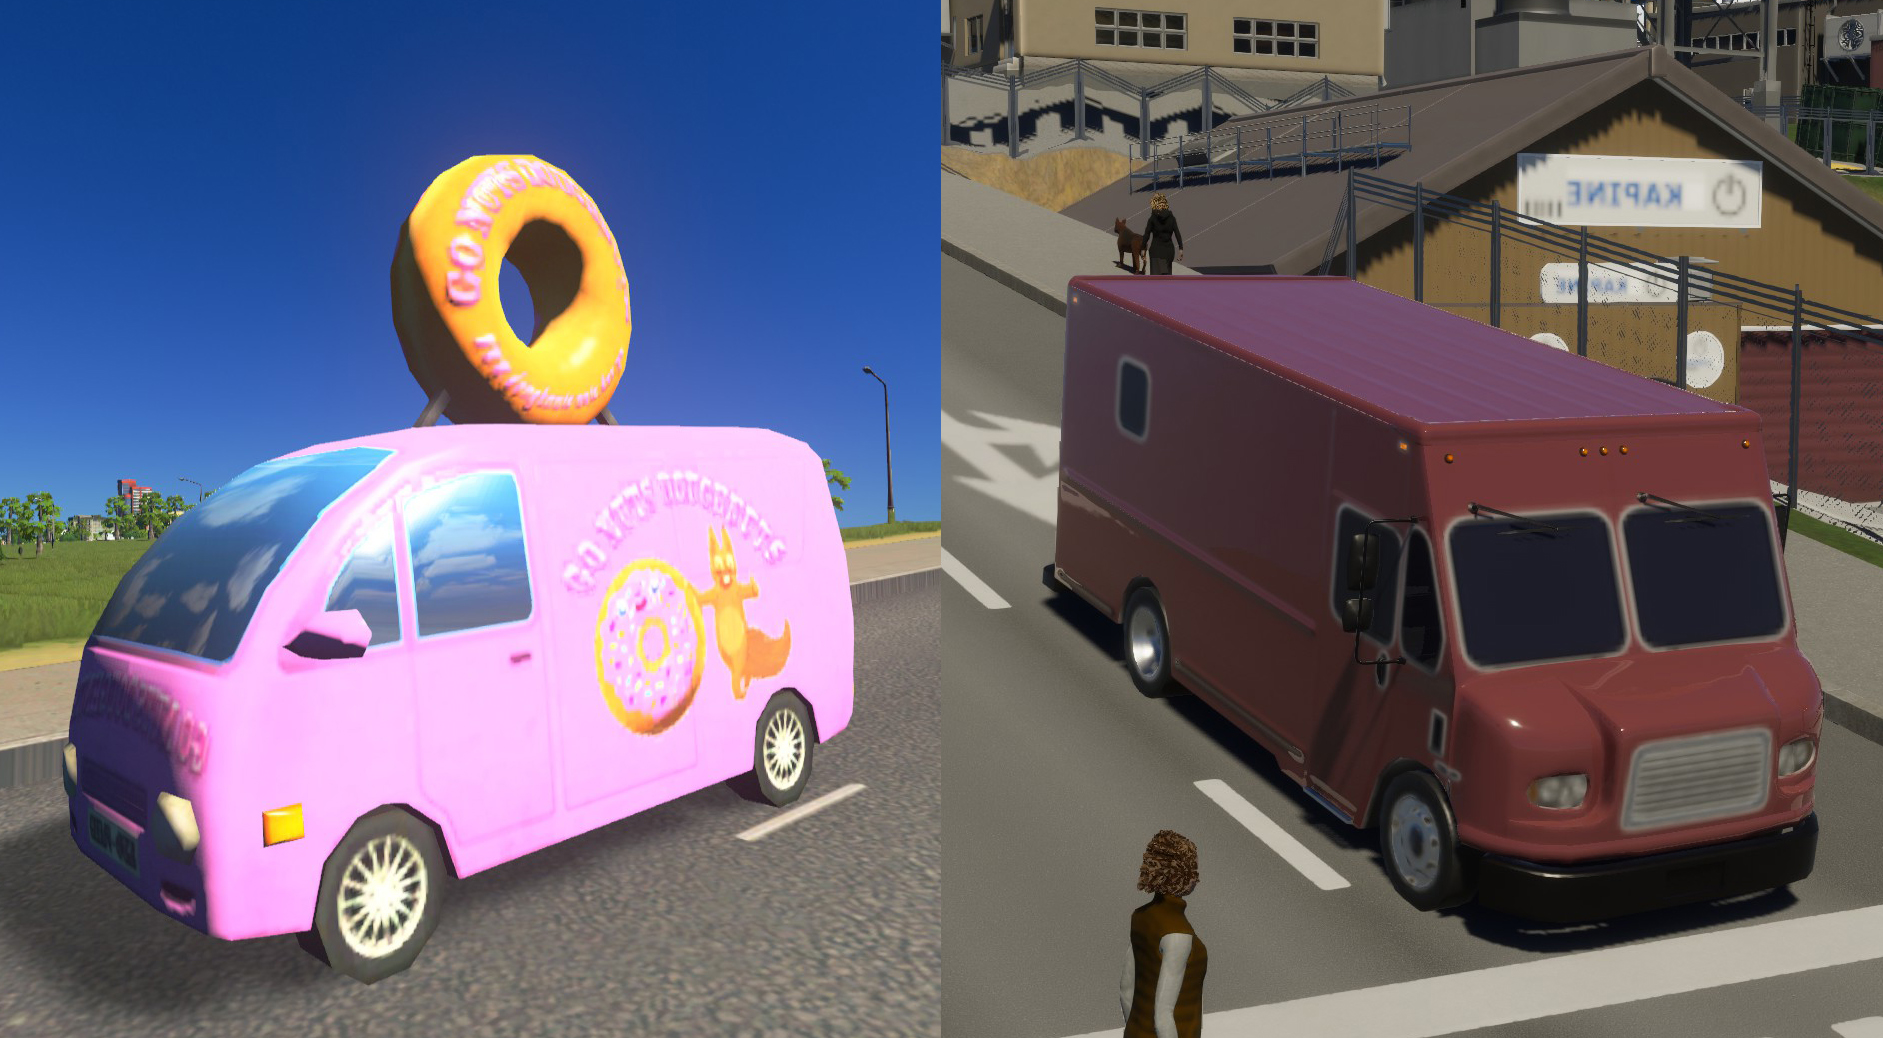  Cities: Skylines 2 leaves out goofy stuff like pink vans with giant donuts on them, and I miss it 